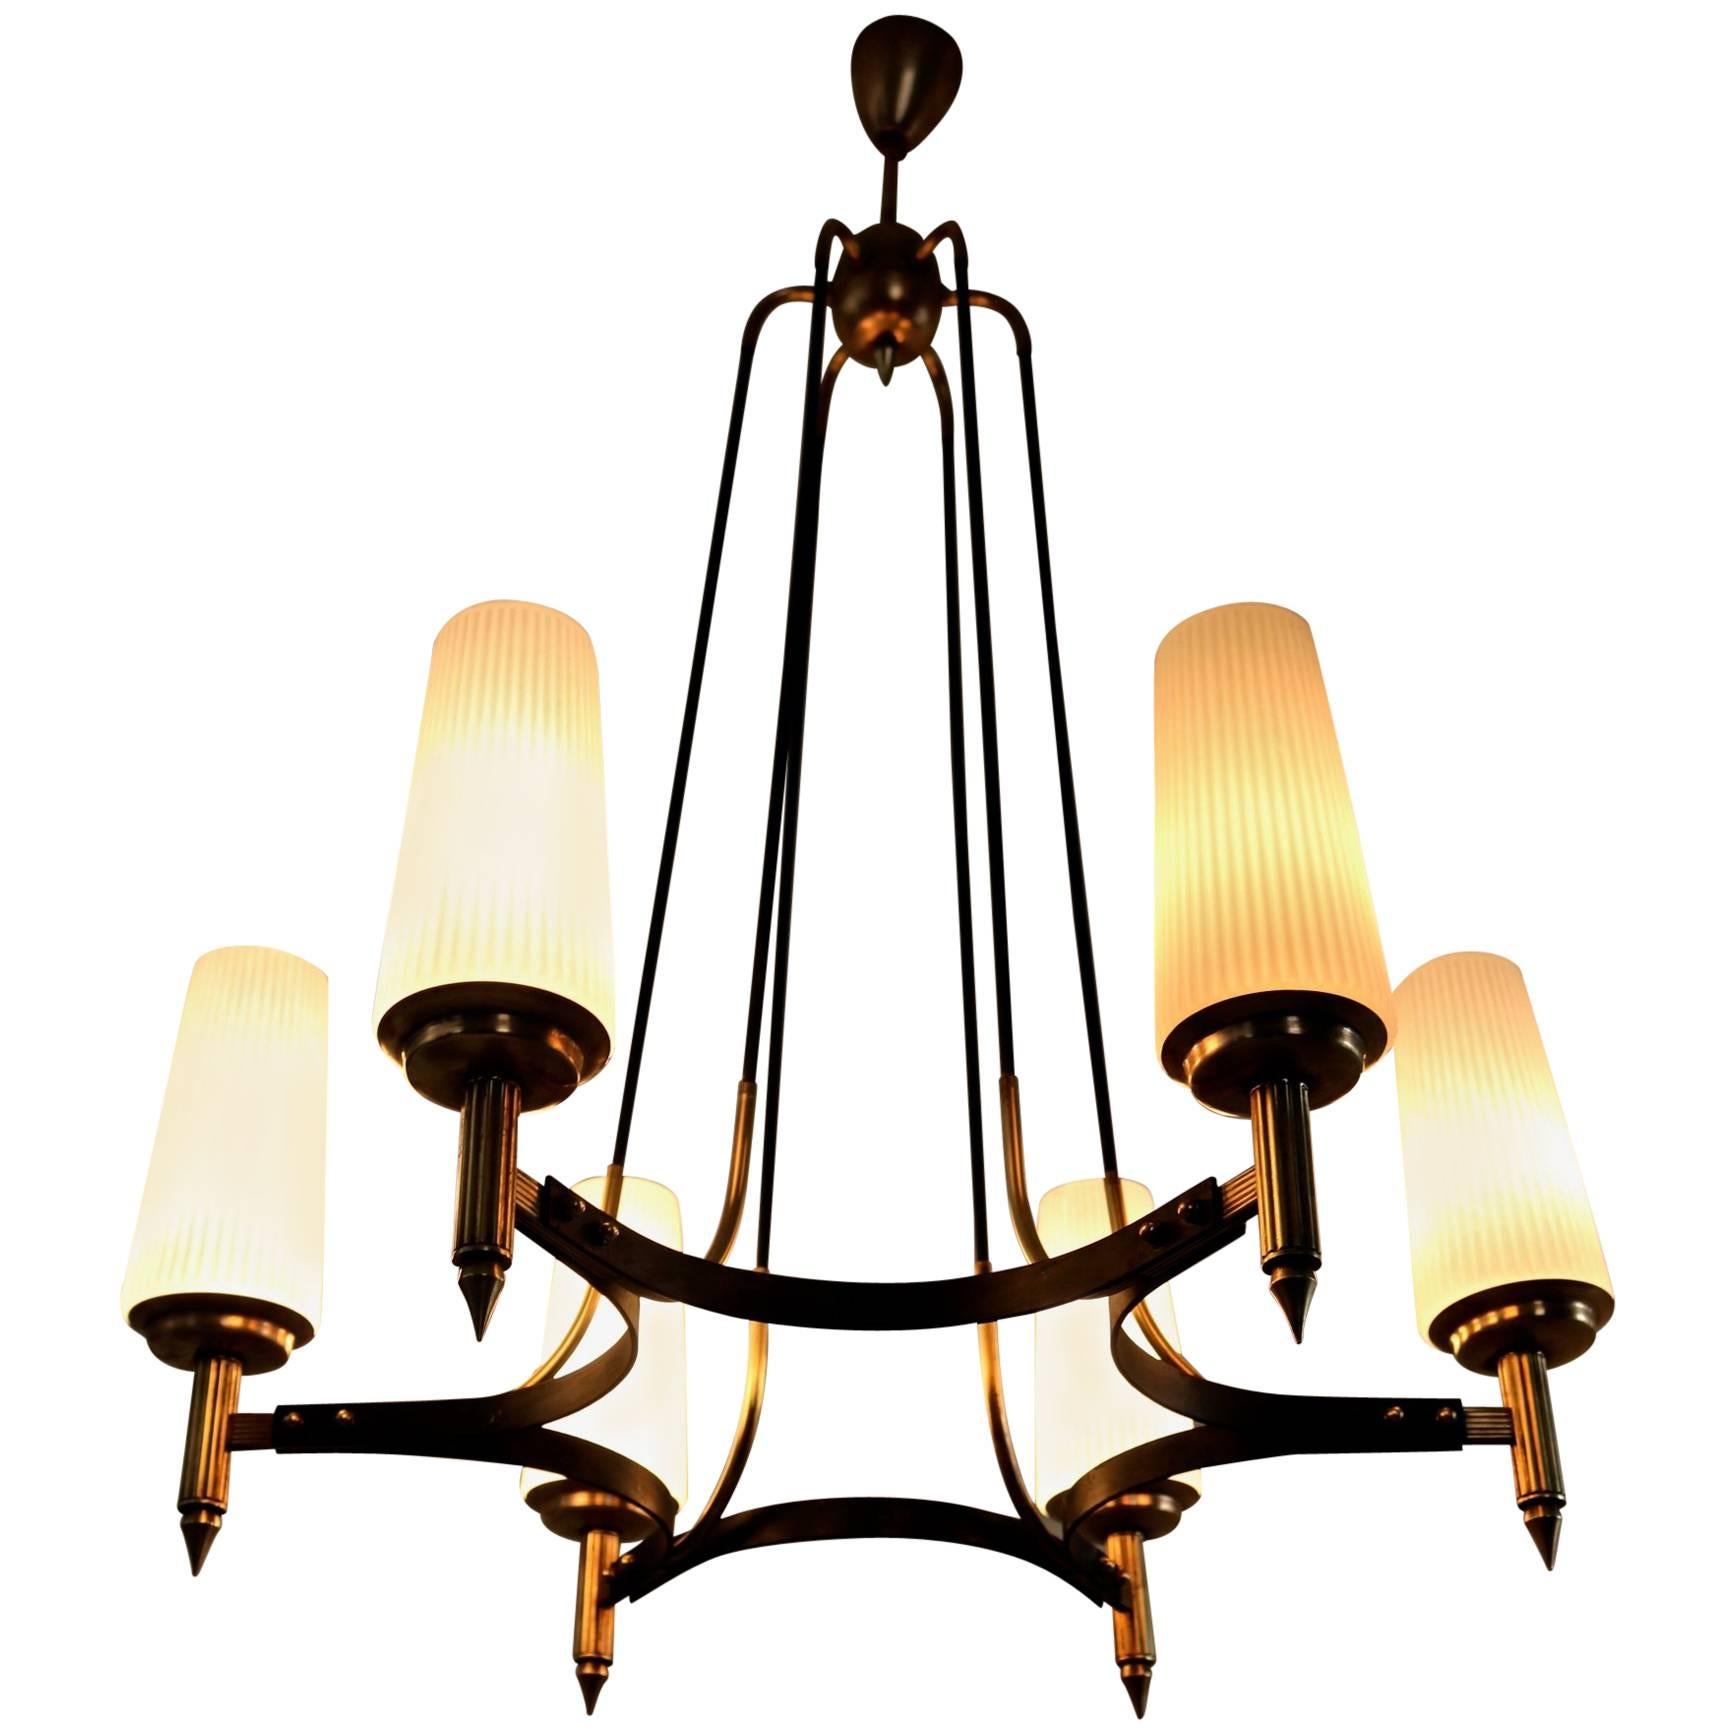 Opaline Glass, Brass and Varnished Iron Chandelier by Stilnovo, Italy, 1950s